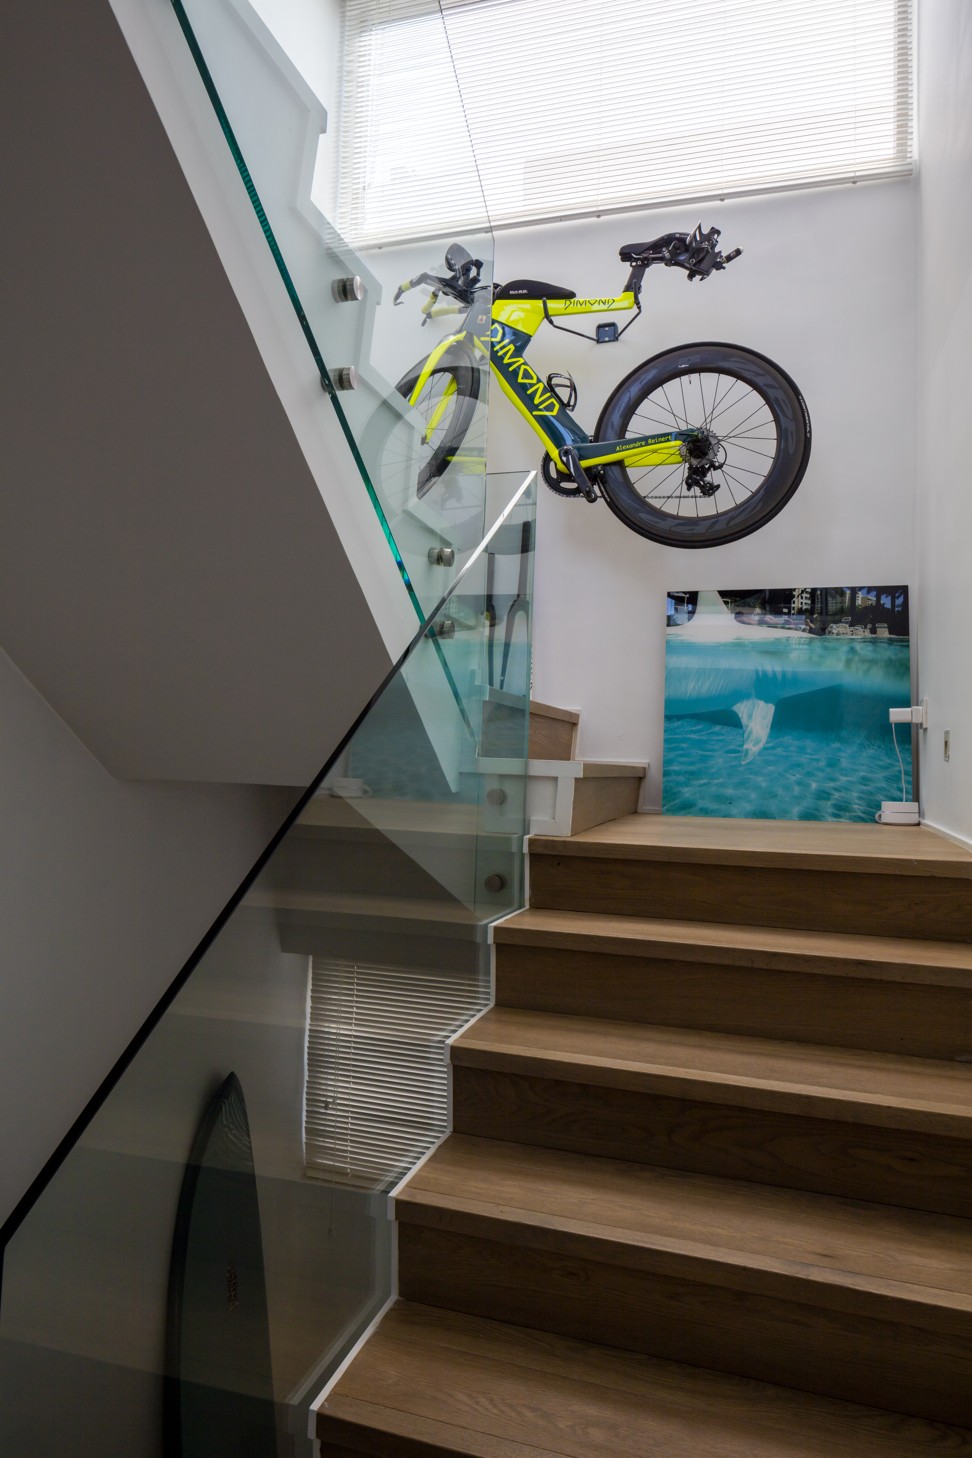 Tania Reinert makes most of the space by propping her husband’s bikes on racks in the stairwell.